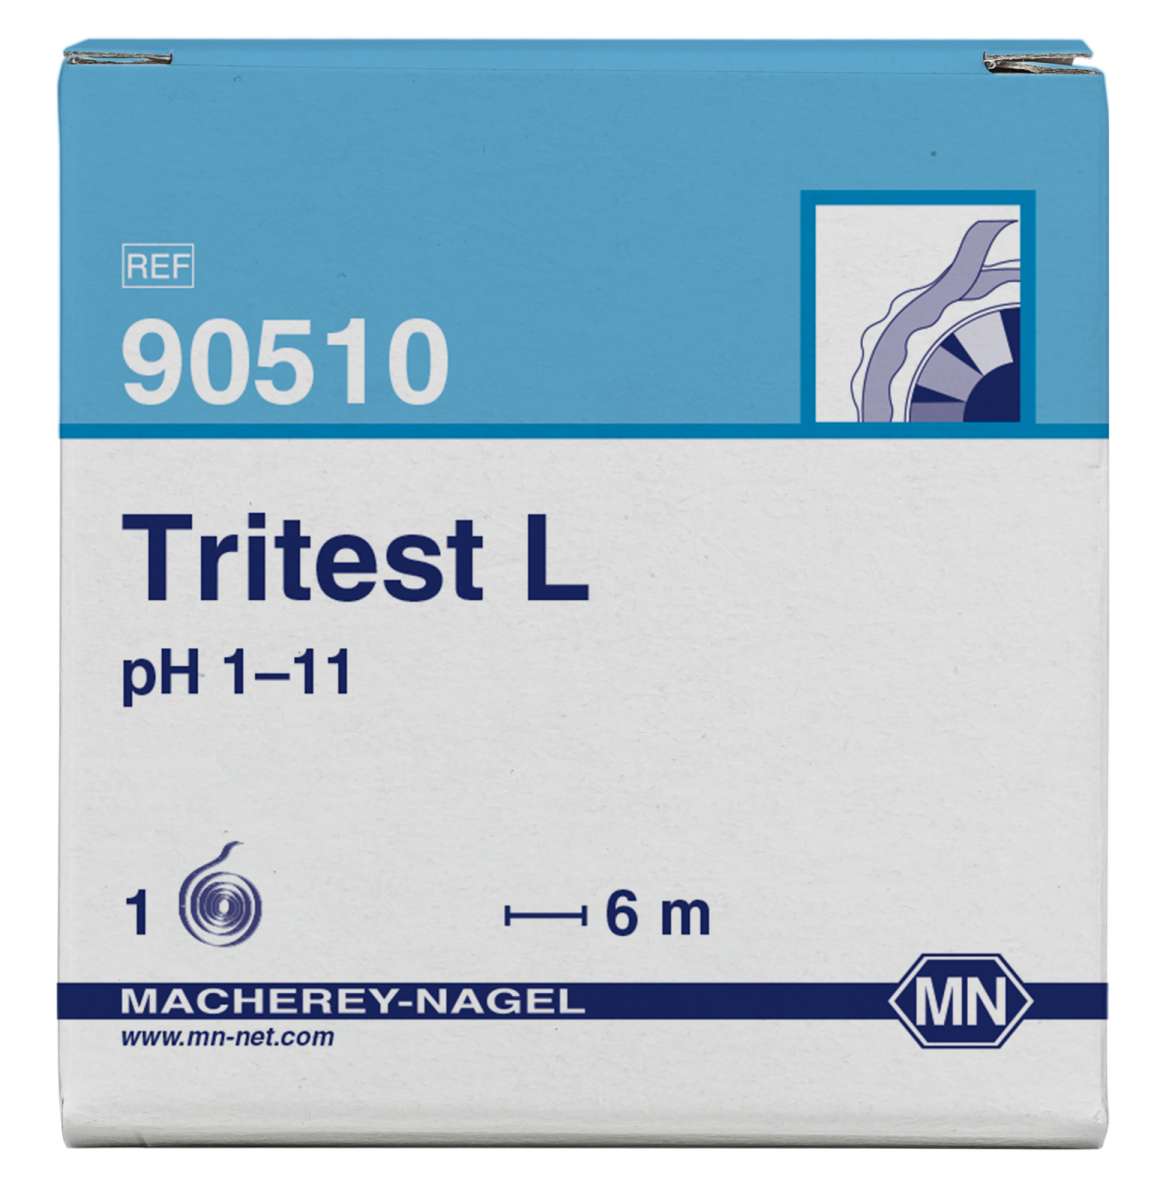 Refill pack for pH test paper Tritest L pH 1-11 (3 reels of 5m length and 14mm width)